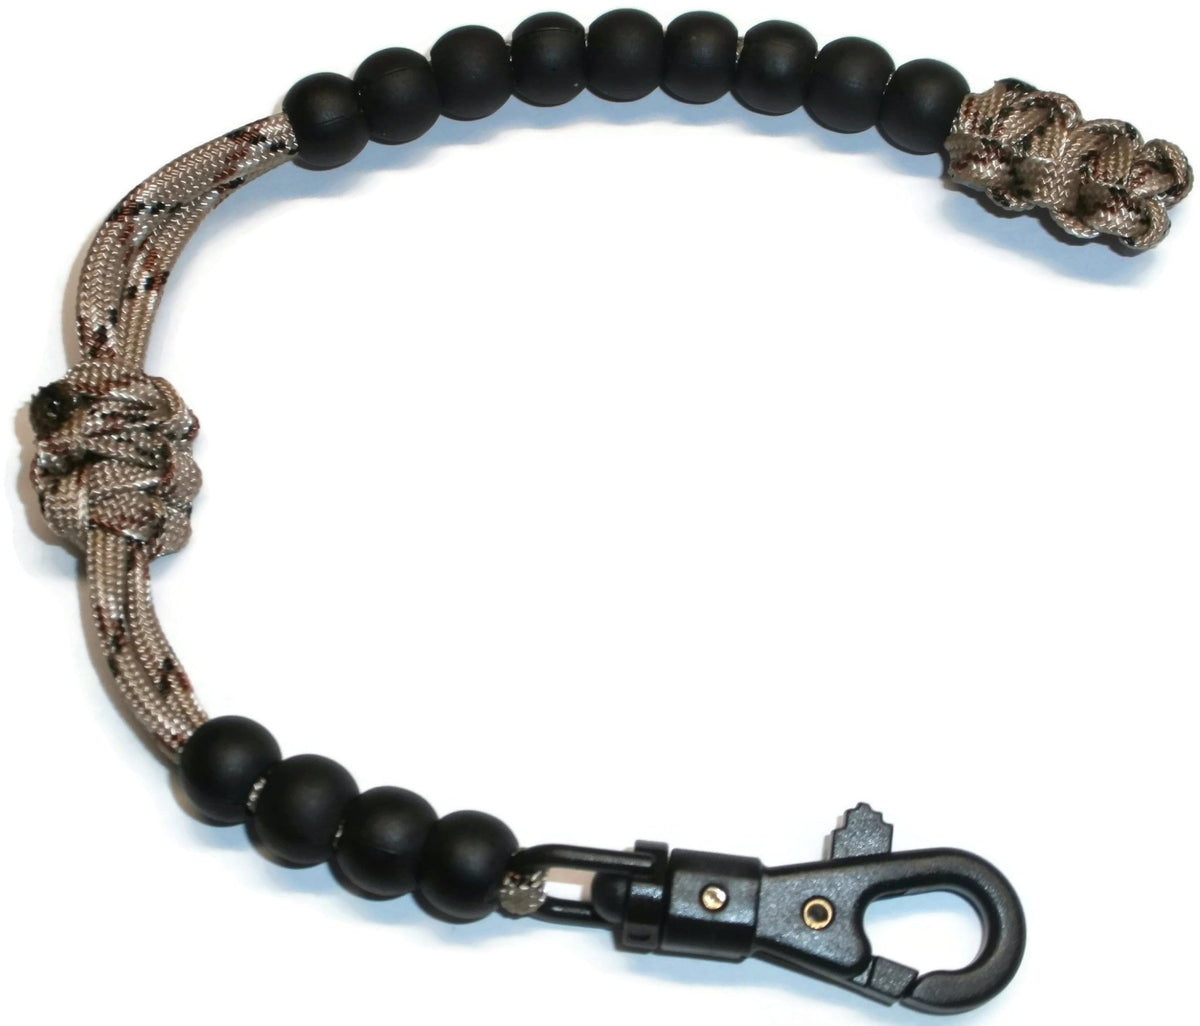 Black Paracord Pace Counter Ranger Beads